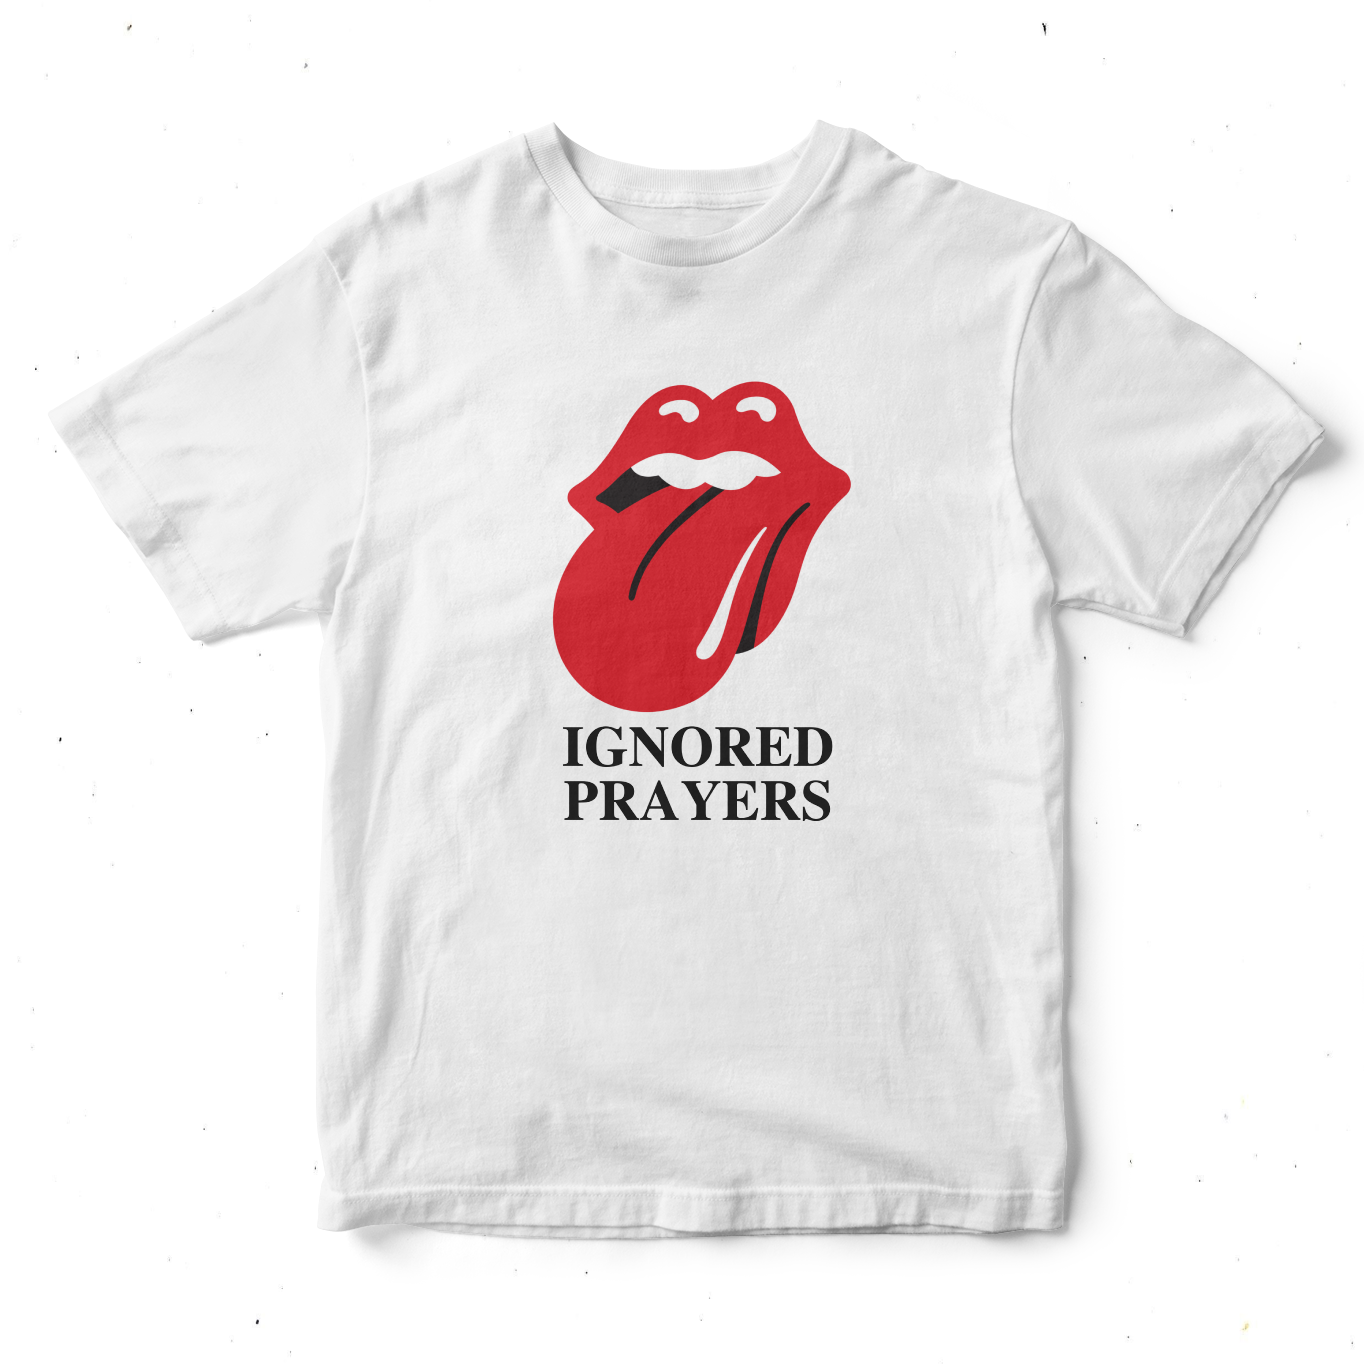 the rolling stones t shirt